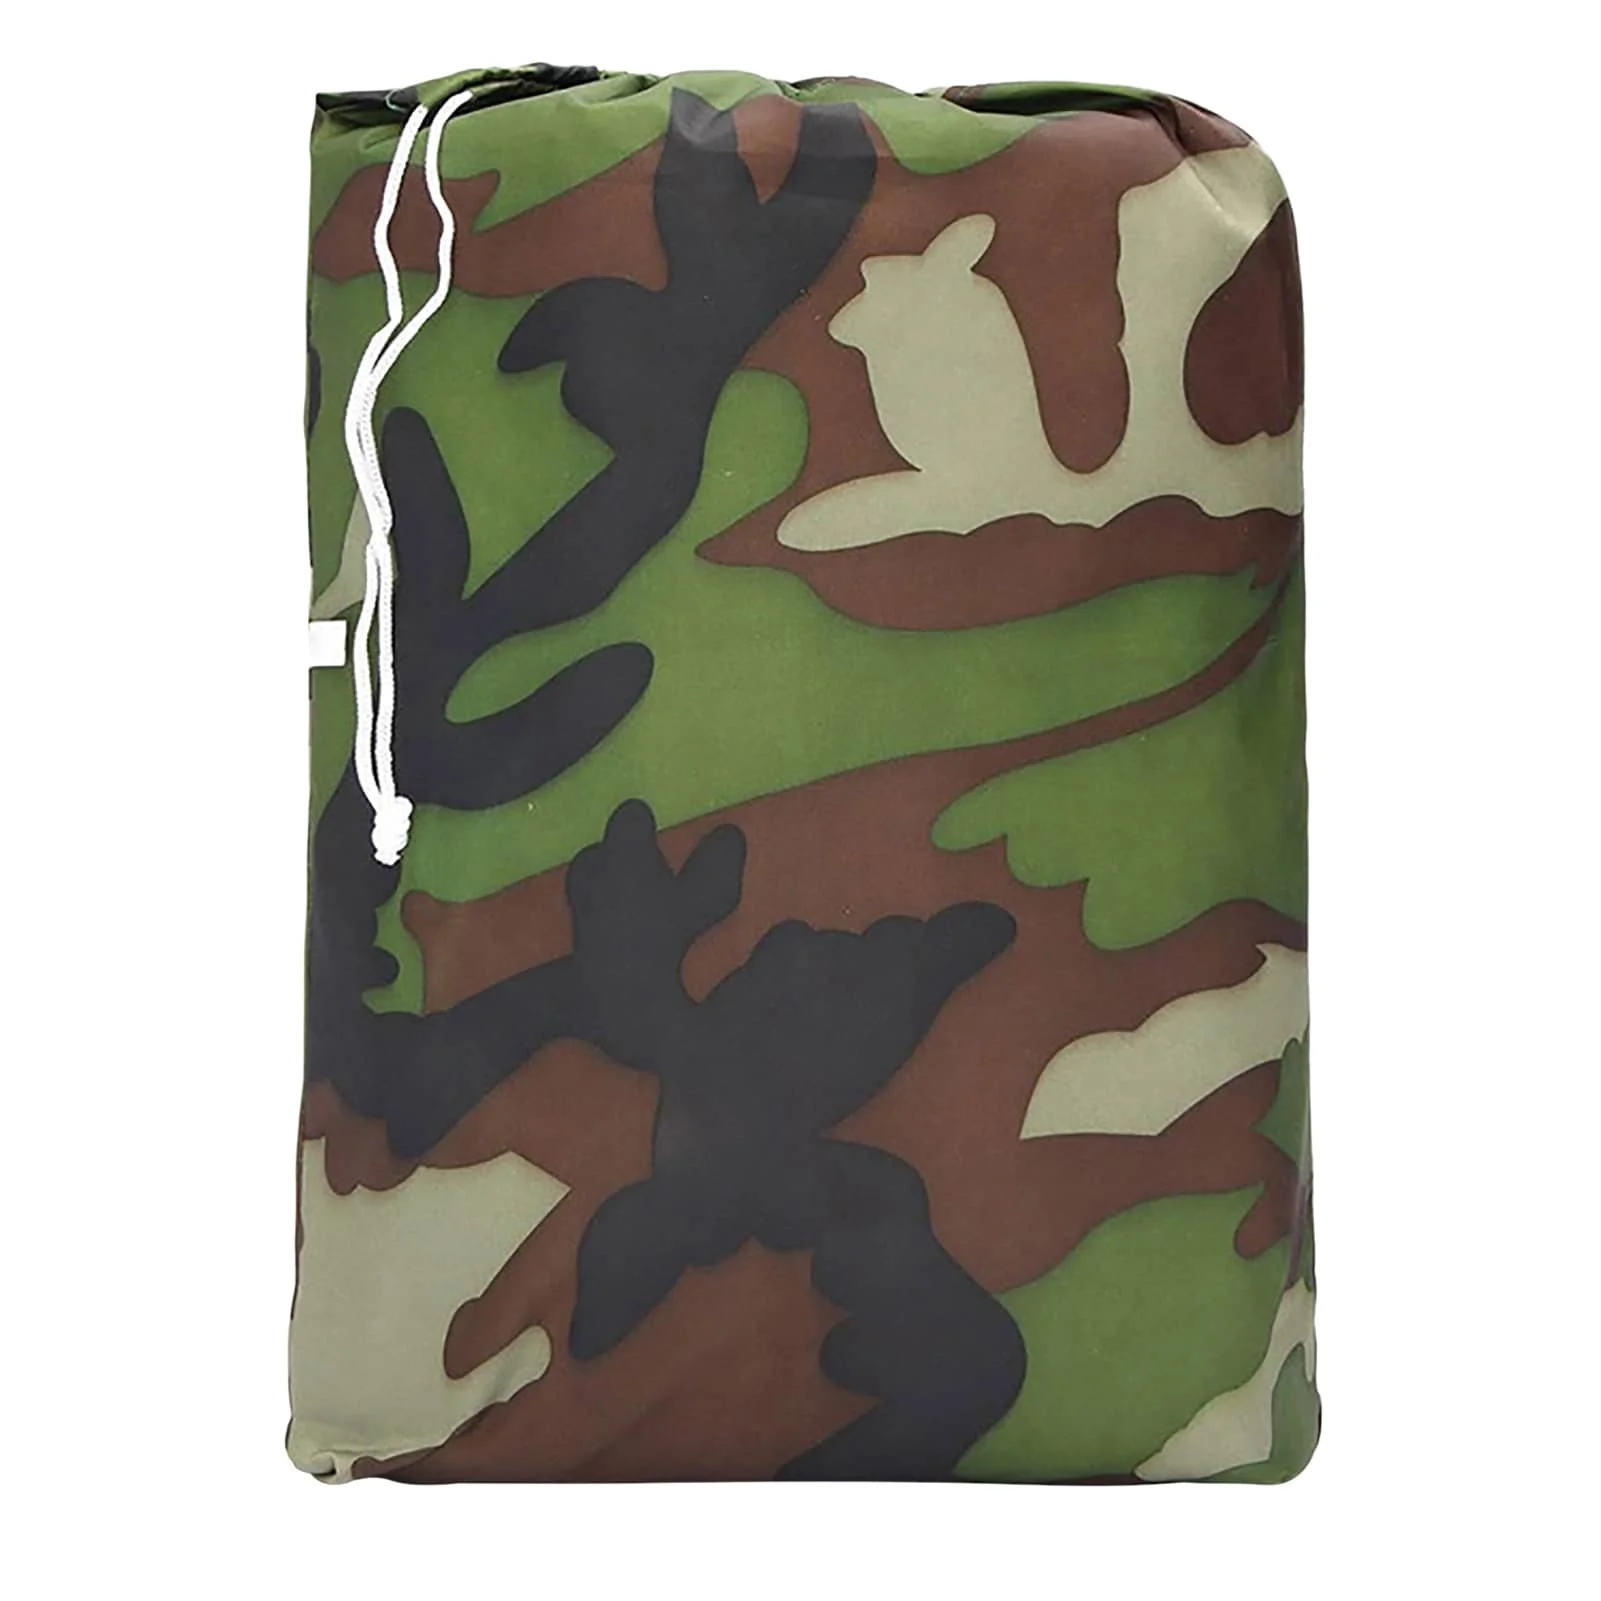 

ATV Camo Cover Camouflage Waterproof Covers Protector Universal Fit For ATV Quad Motorcycle Vehicle Scooter Kart Bike M L XL XXL